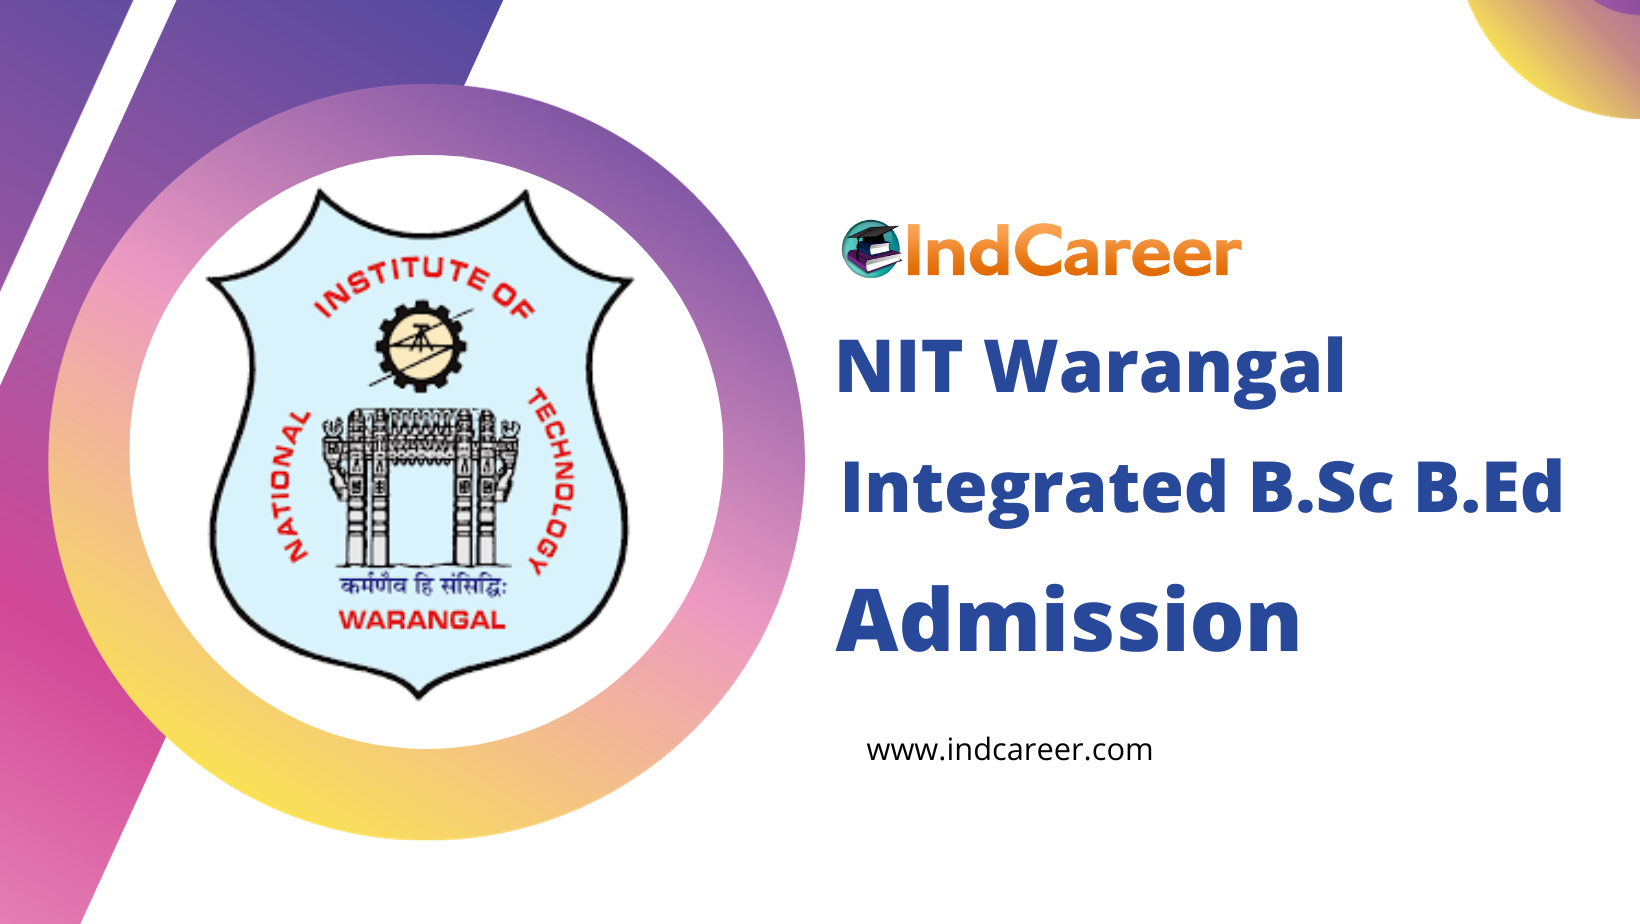 NIT WARANGAL National Institute Of Technology Hoodies For Women – TEEZ.in